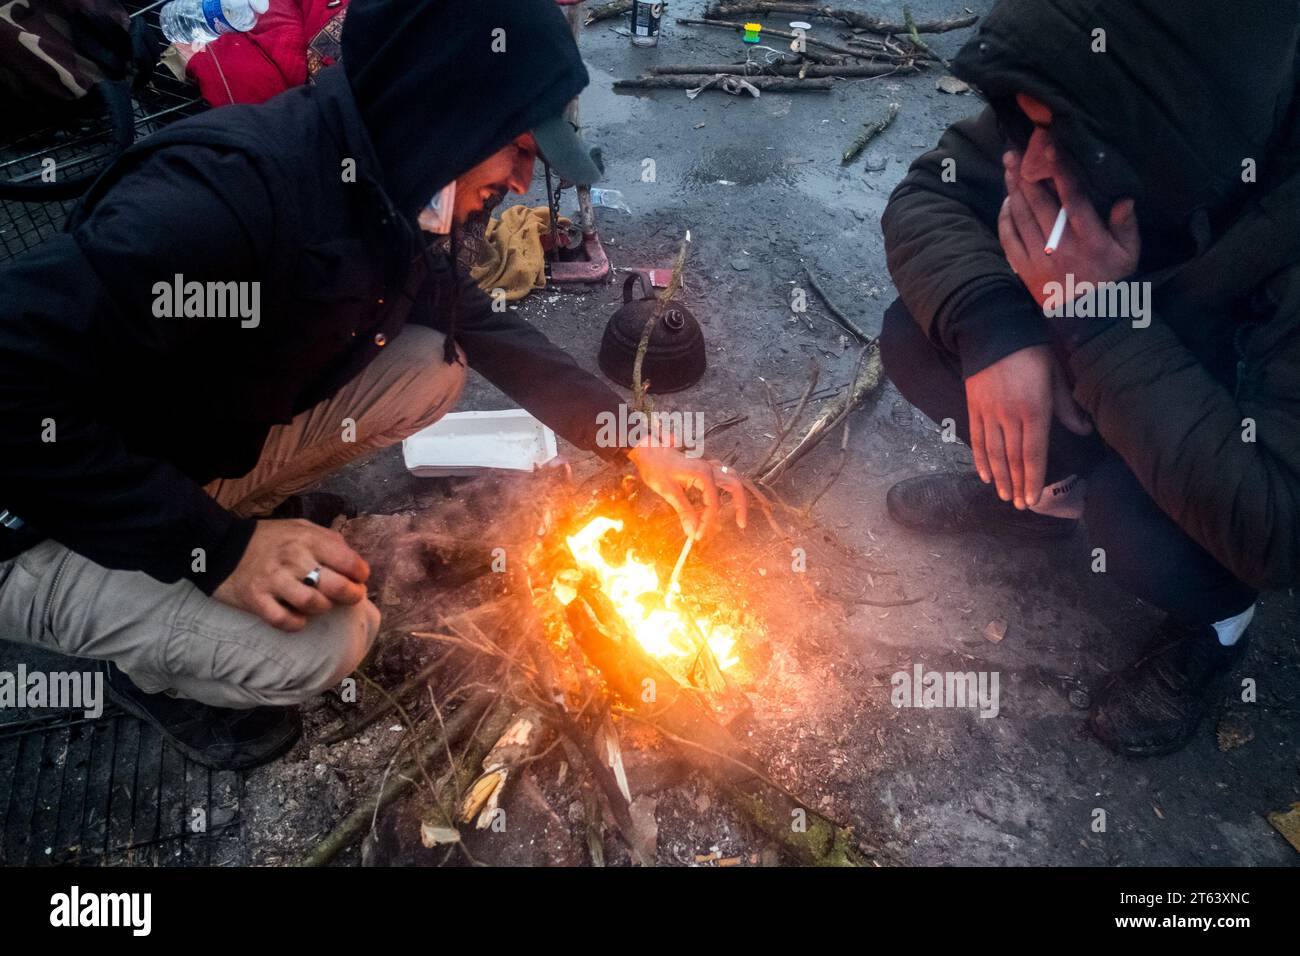 Michael Bunel/Le Pictorium - November 2016, Evacuation of the Calais 'Jungle - 16/11/2021 - France/Haut de France/Grande Synthe - Two men smoke a cigarette during the evacuation of the camp. A camp of over 1,000 people, mostly Kurds and Iraqis, had taken up residence in the shopping area of the Auchan store in Grande Synthe. The prefecture ordered the dismantling of the camp this morning. The exiles were not notified in accordance with the government's undertakings. November 16, 2021. Grande Synthe. France. November 2016, the 'jungle' of Calais, the largest shantytown in Europe Stock Photo